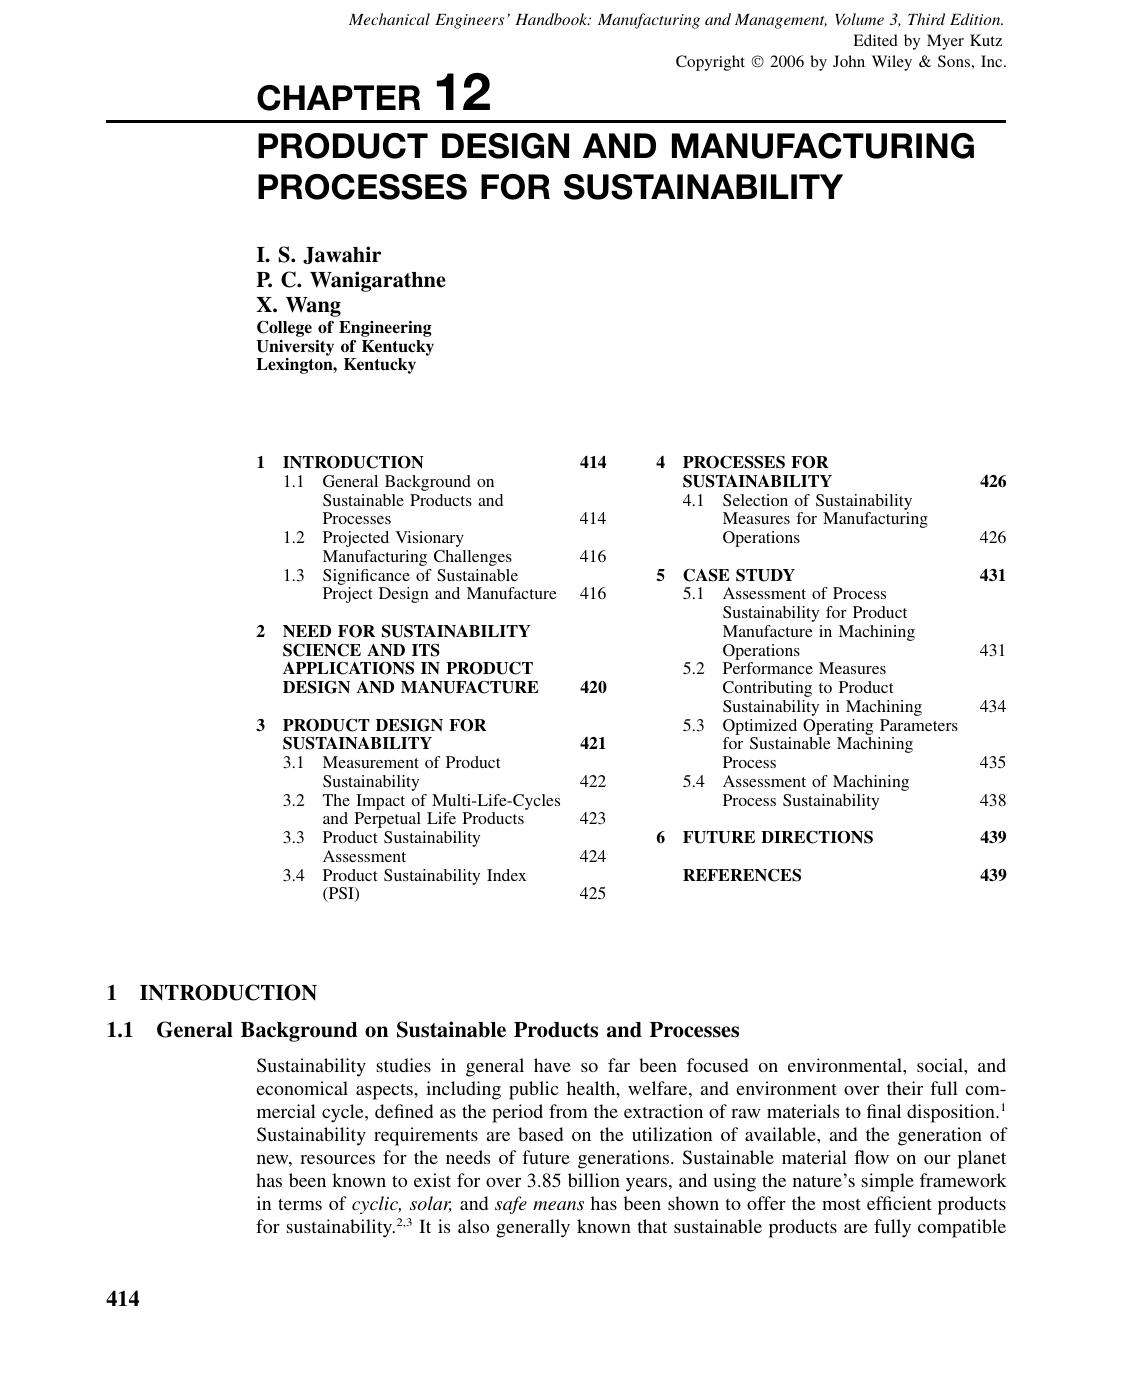 Product Design and Manufacturing Processes for Sustainability by penta